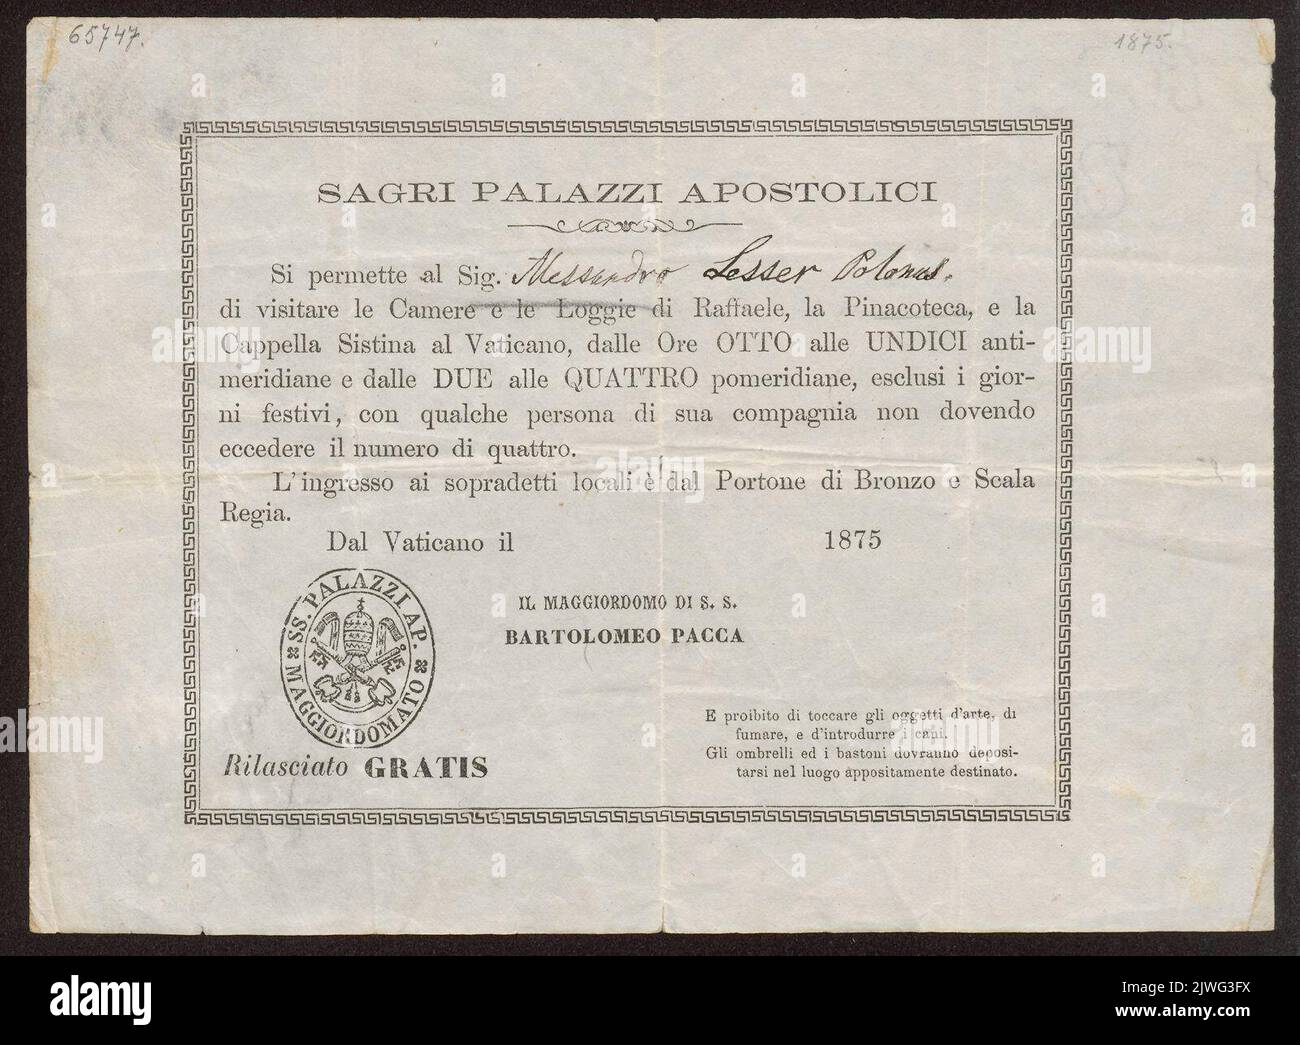 Permit for Aleksander Lesser to visit the Vatican Gallery and the Sistine chapel for free. Stolica Apostolska (Watykan), author Stock Photo